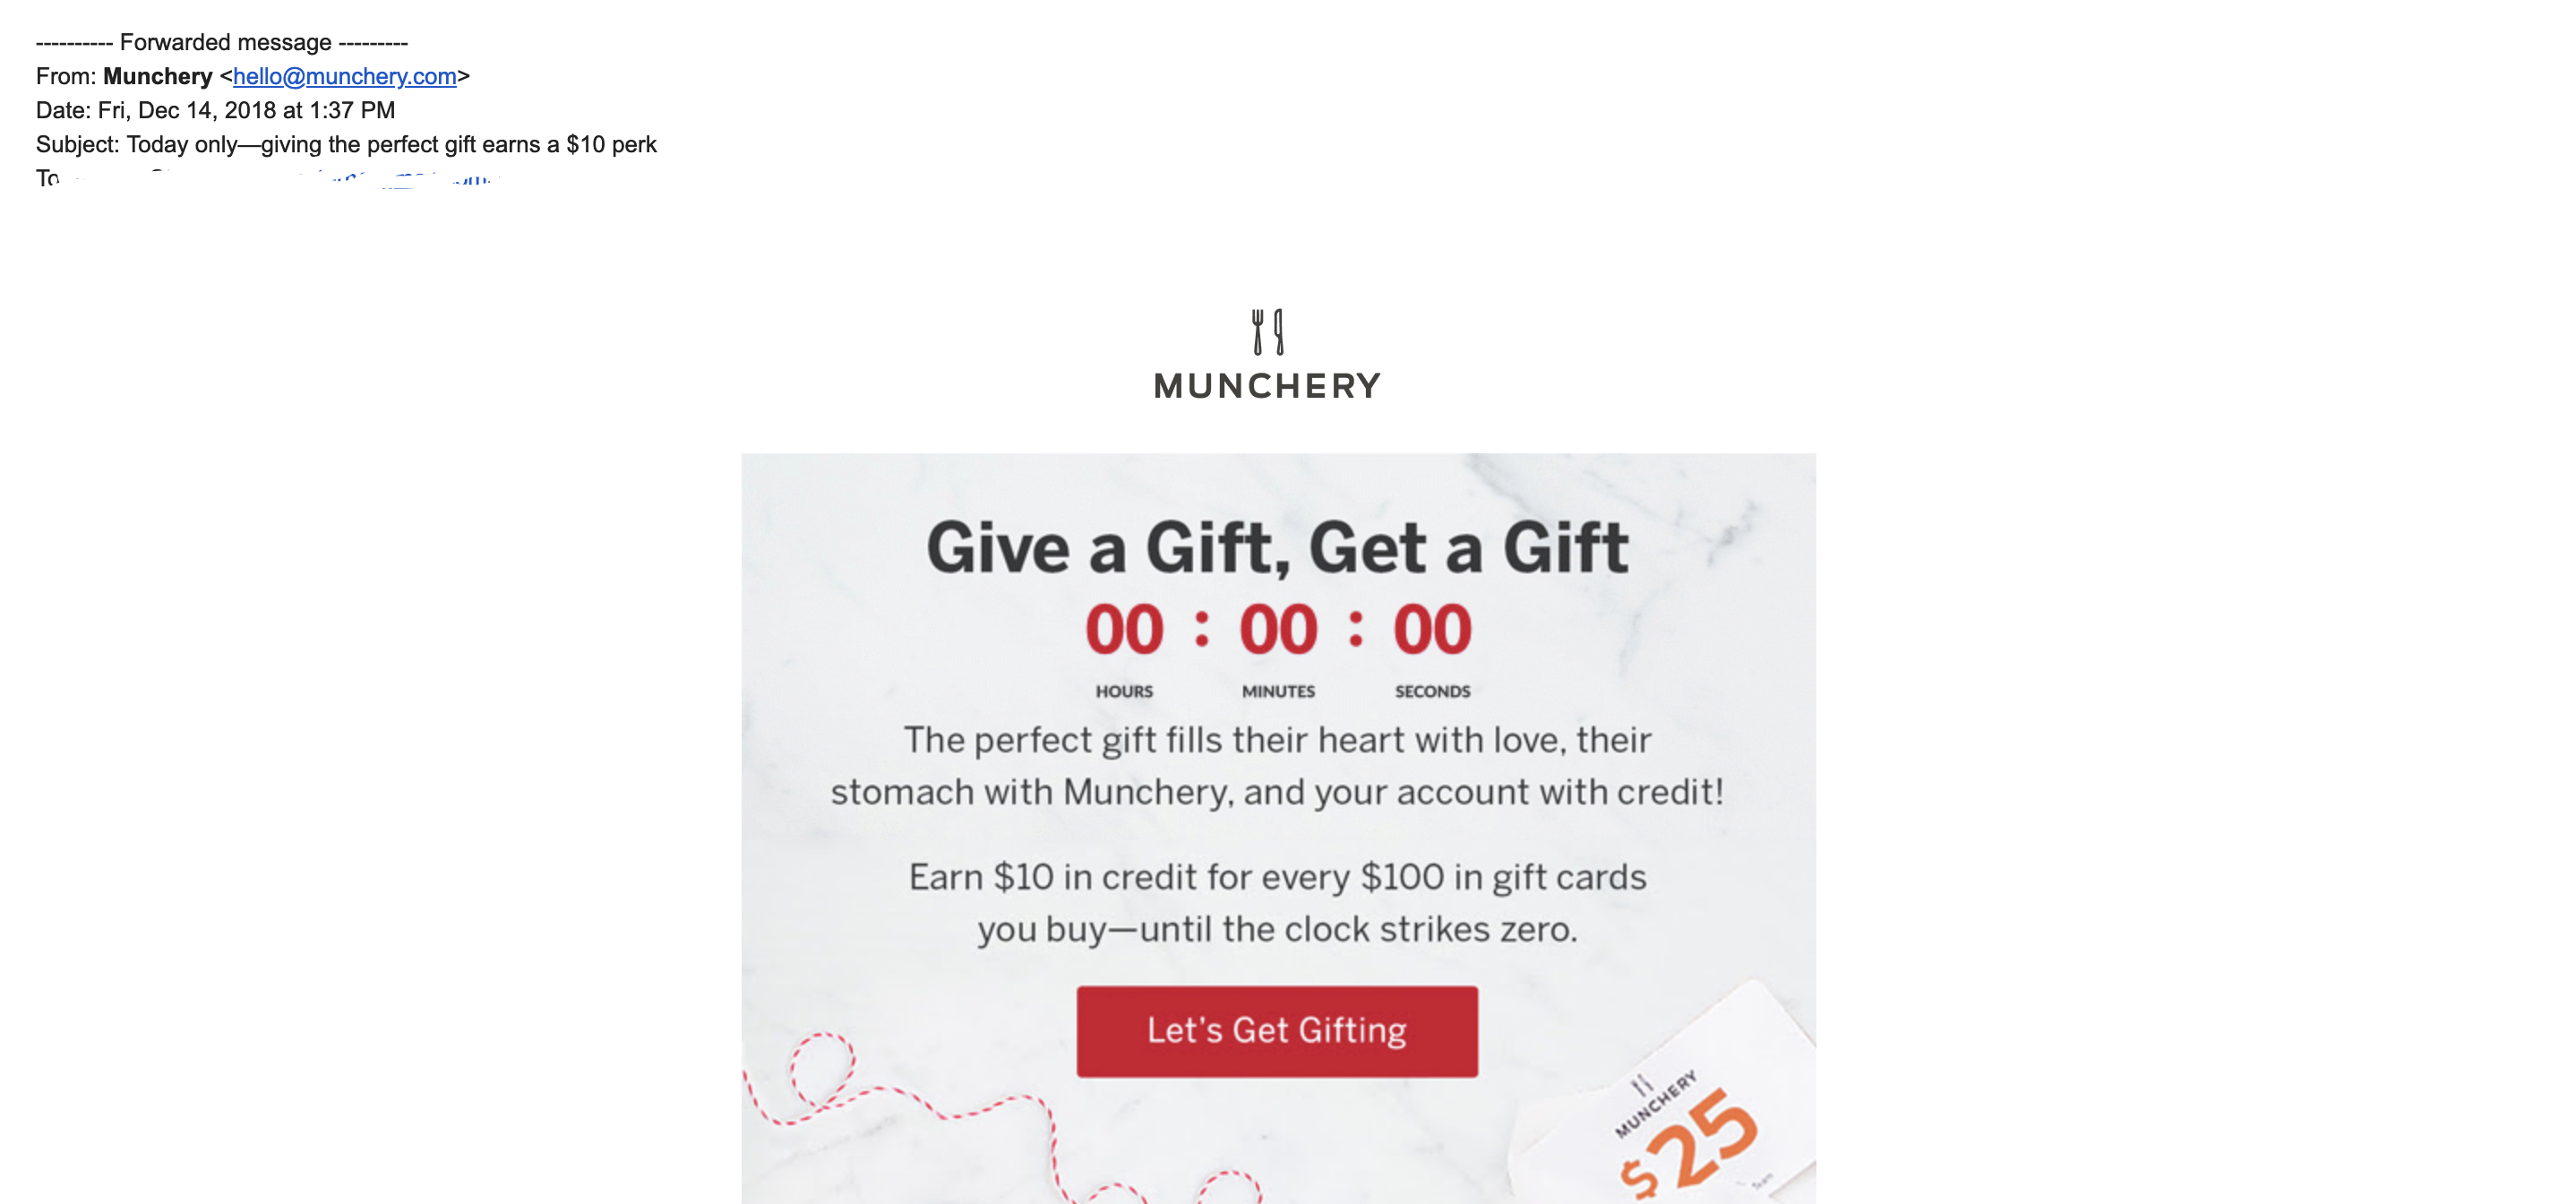 Failed Meal Kit Service Munchery Owes 6m To Gift Card Holders